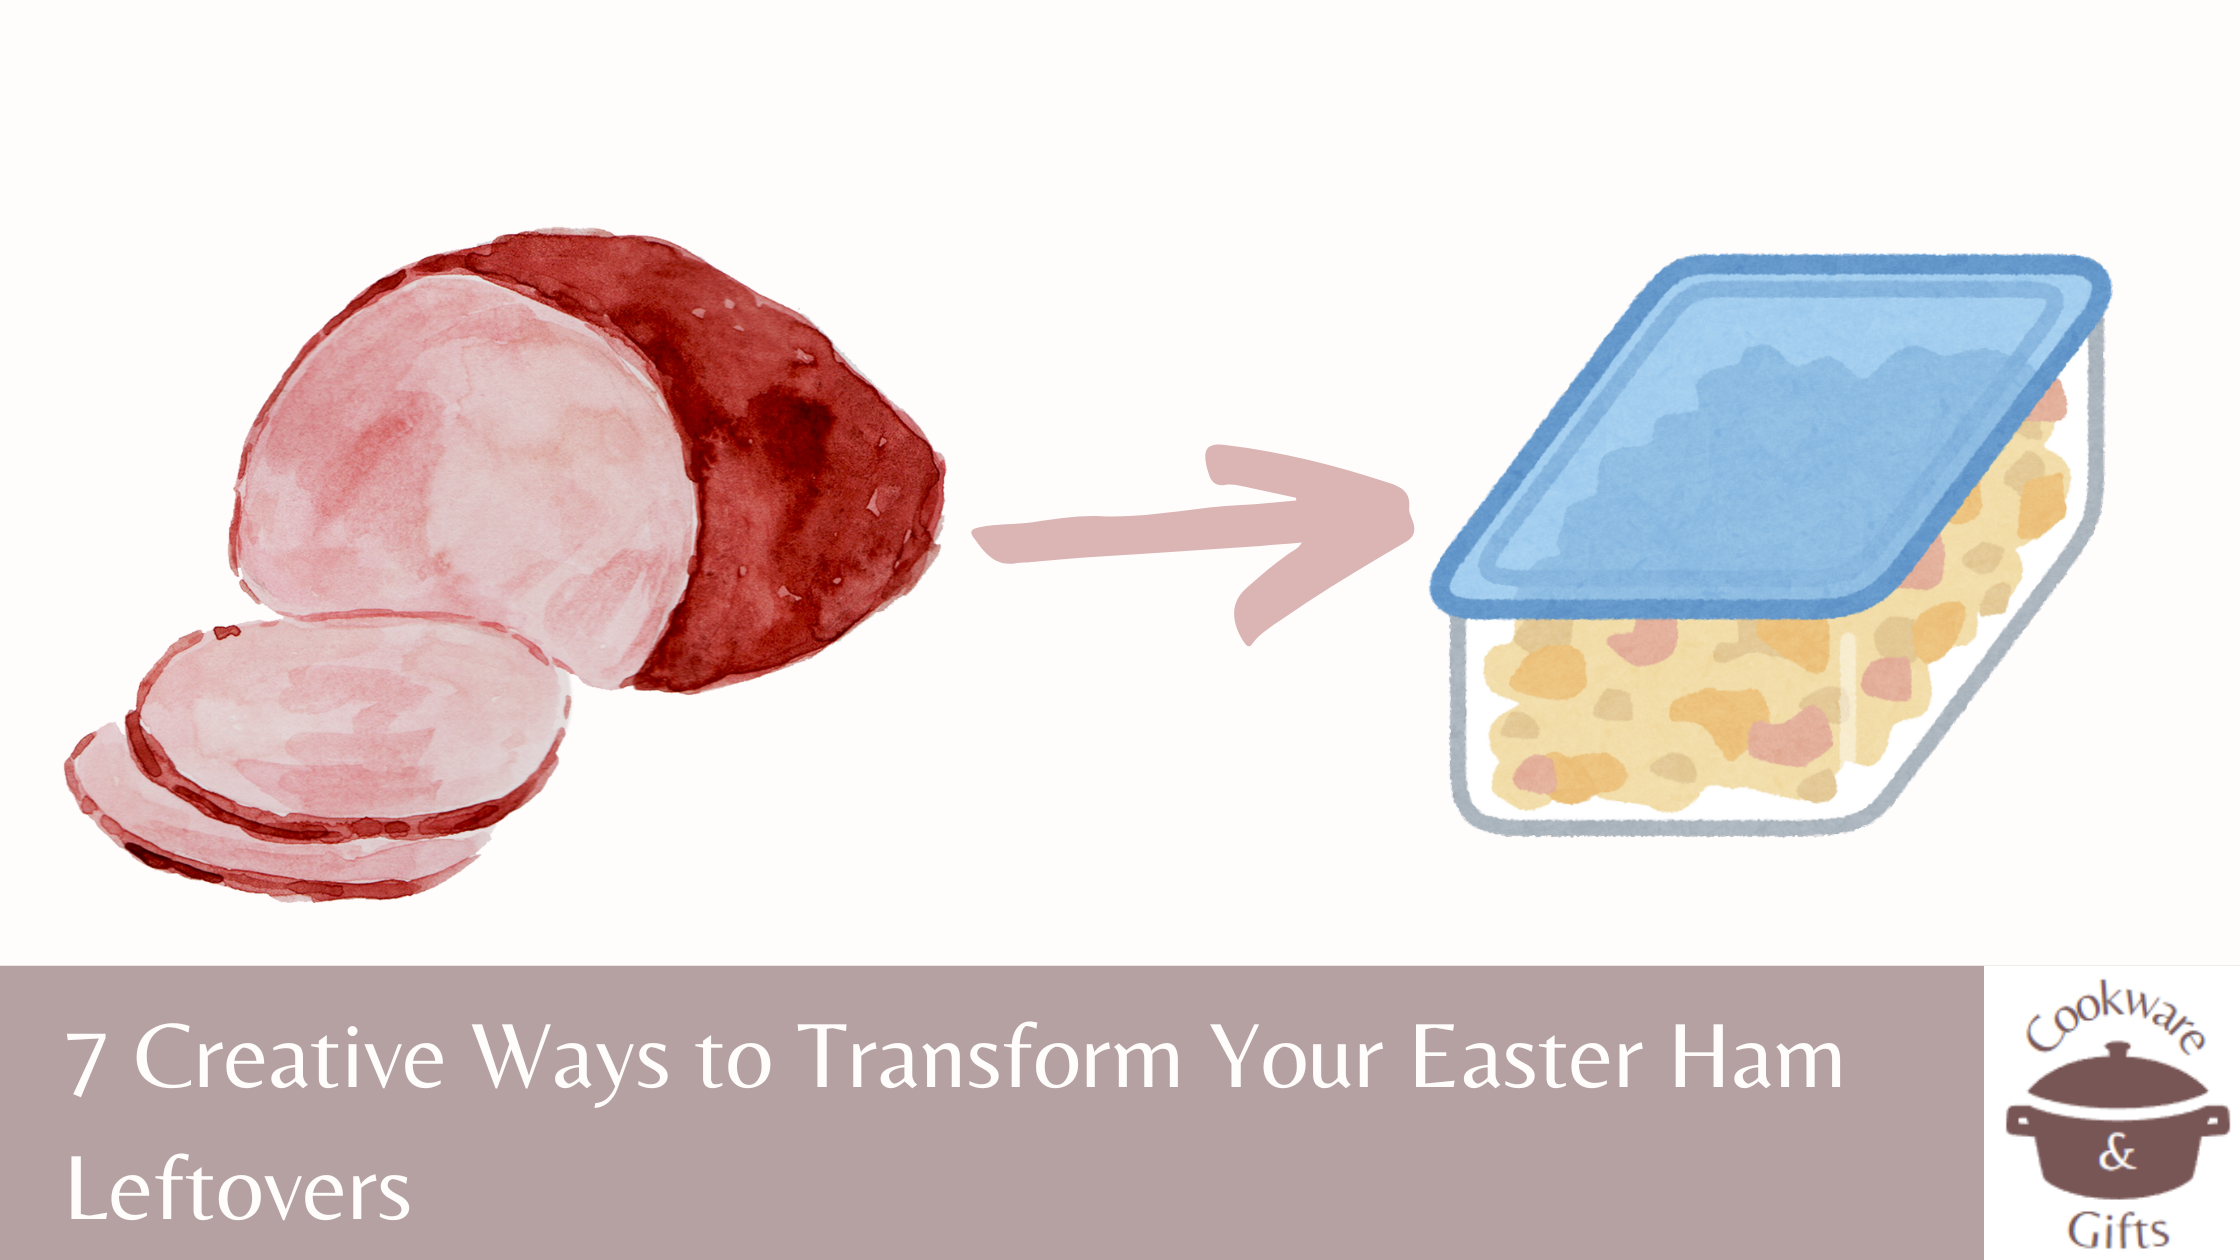 7 Creative Ways to Transform Your Easter Ham Leftovers